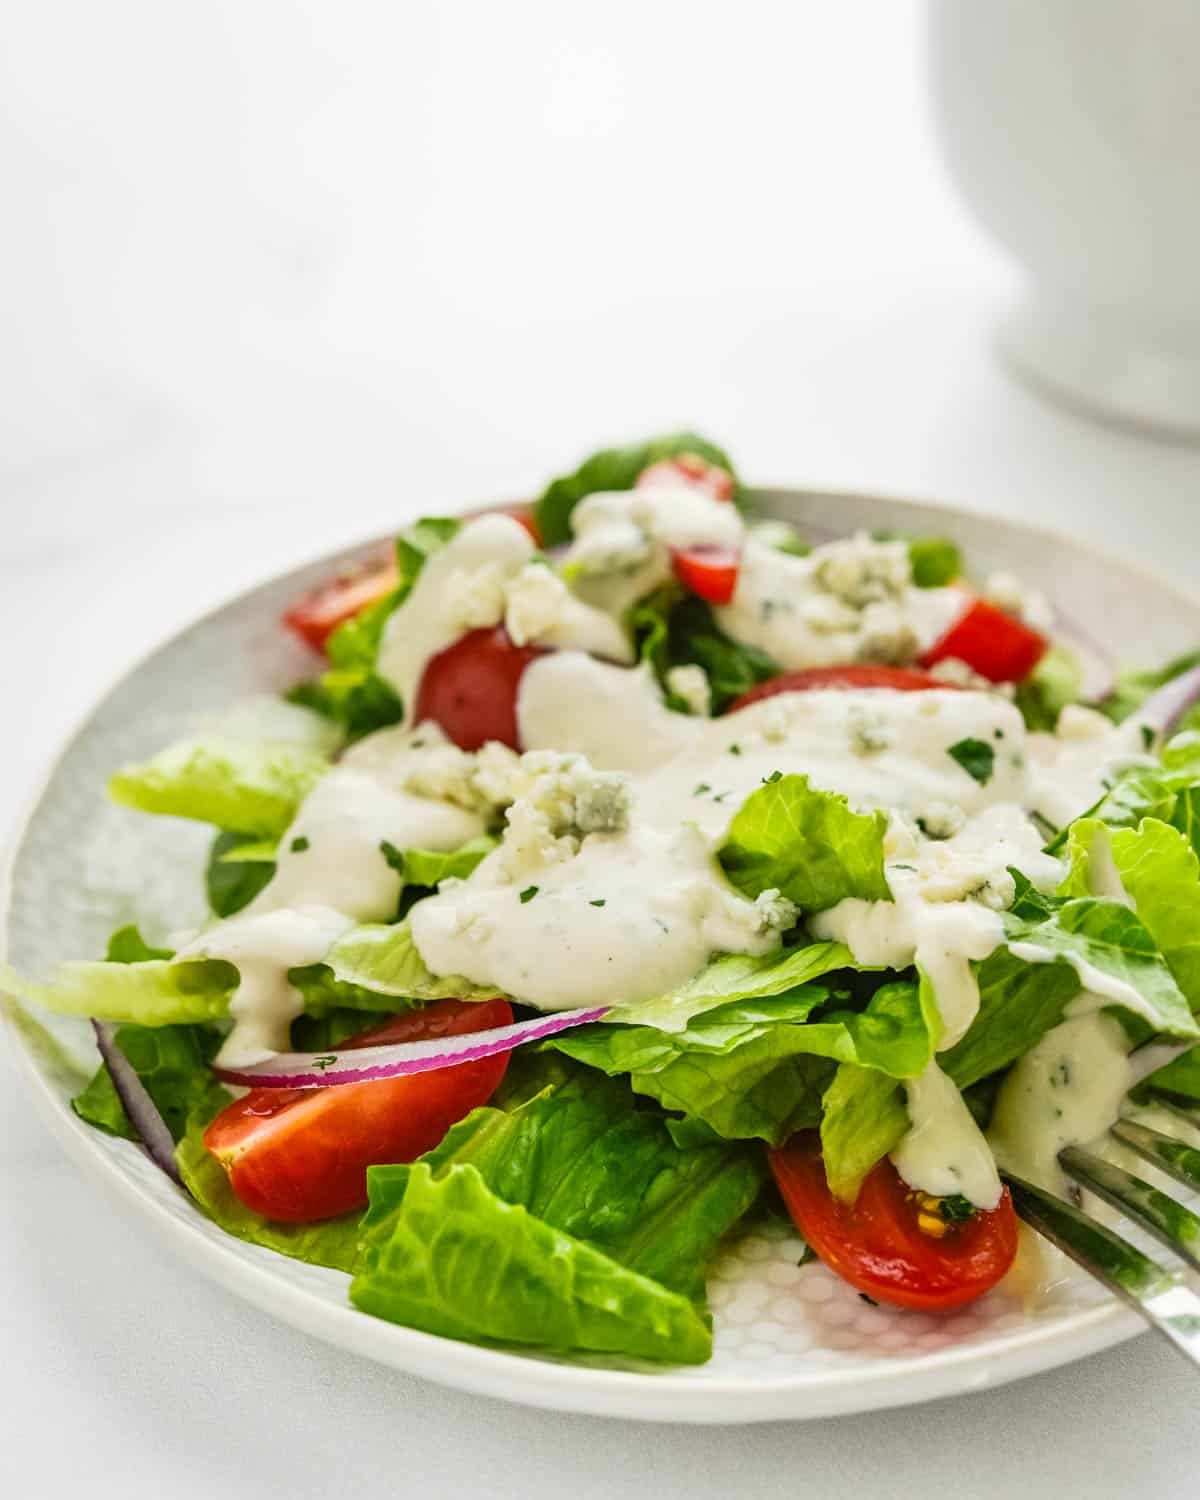 A green salad with blue cheese dressing.